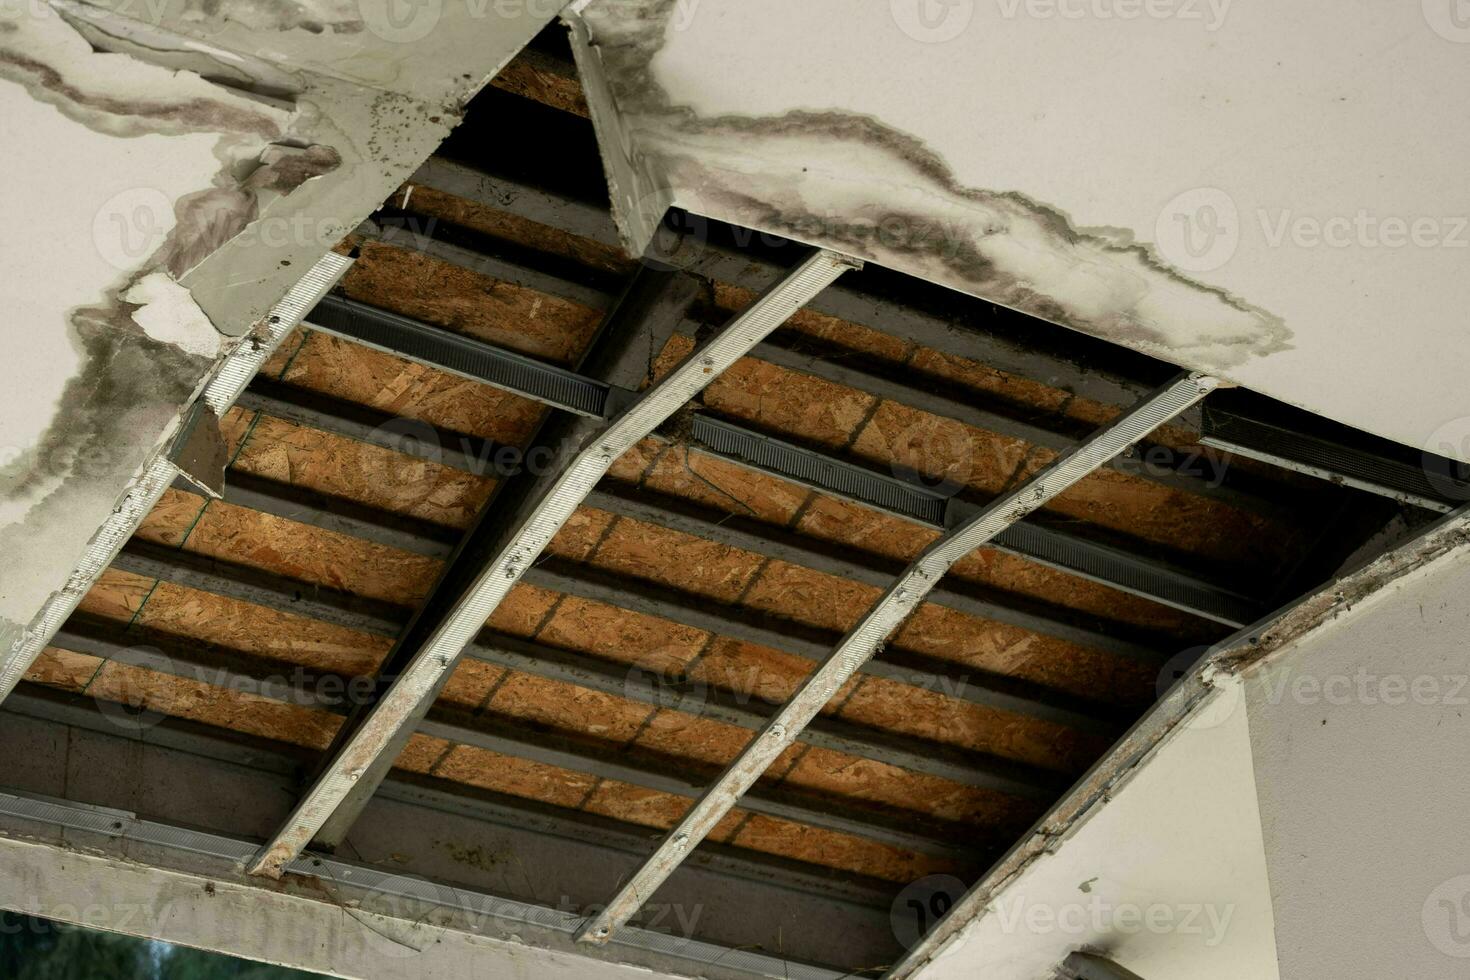 Ceiling panels had damaged a large hole in the roof from a rainwater leak. Ceiling damaged by water. The ceiling broke down photo